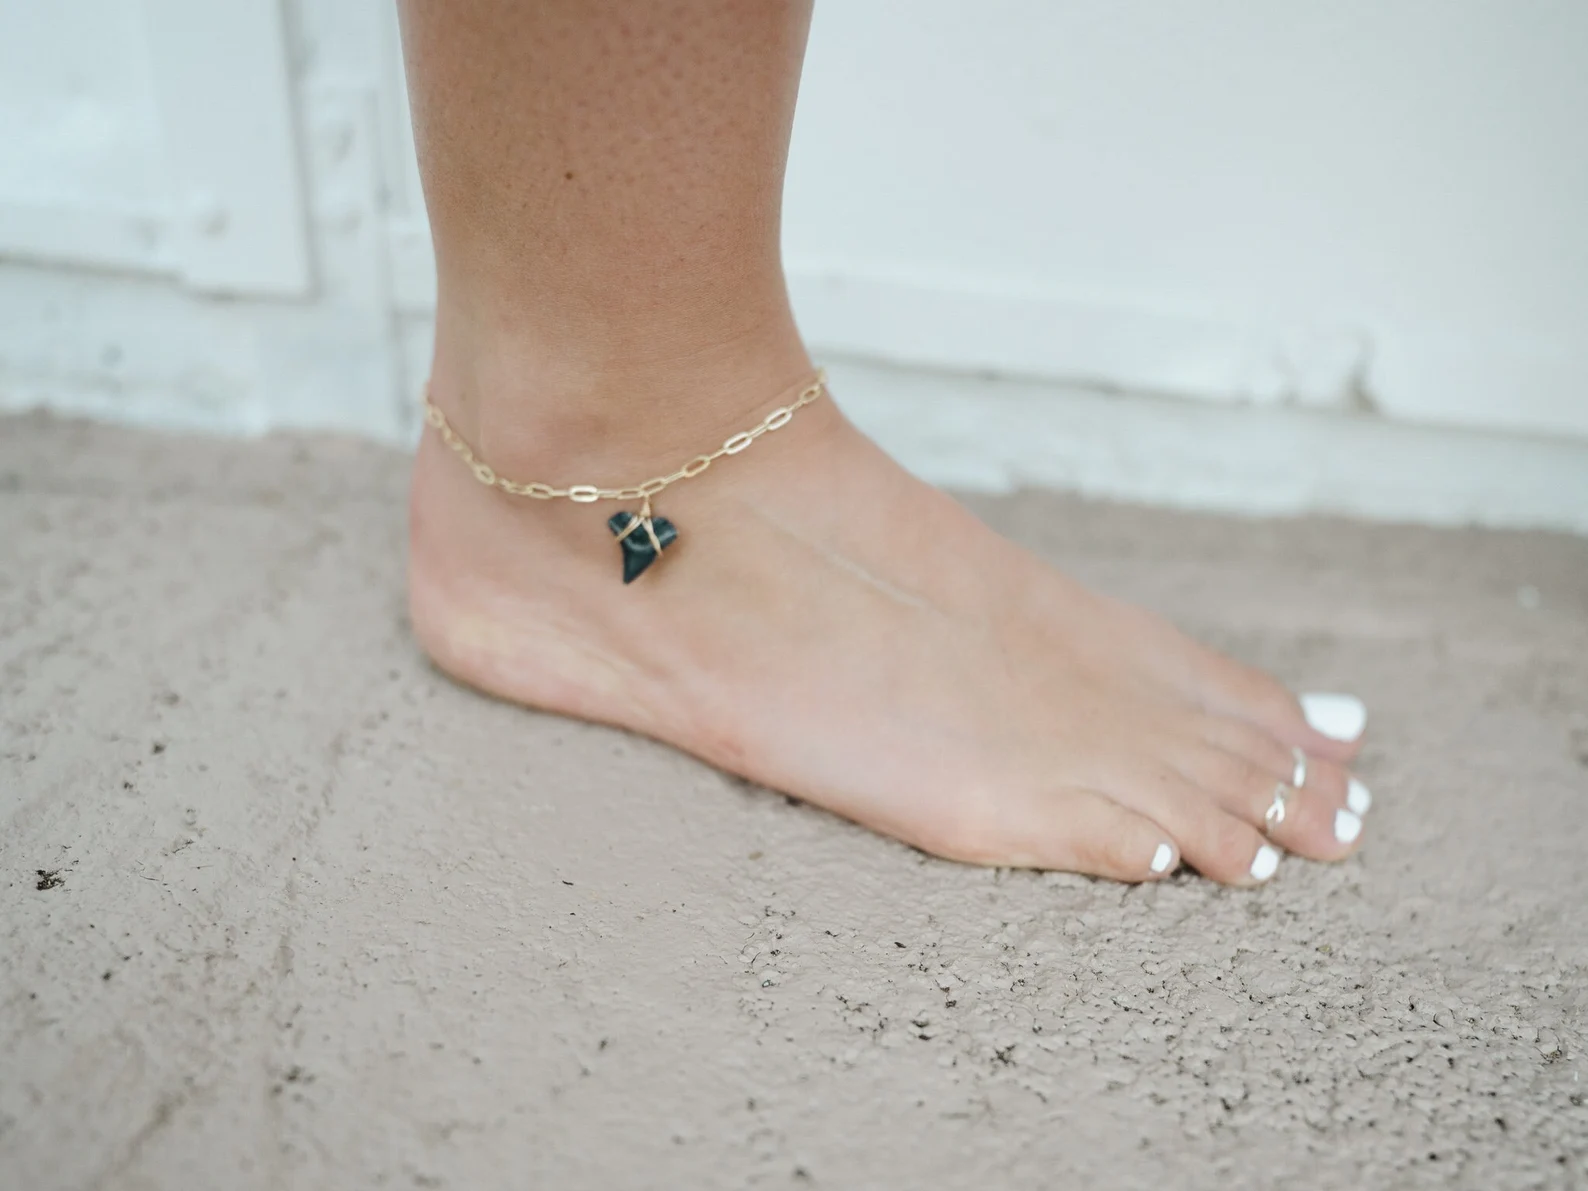 Black Color Round Link Chain Magnetic Slimming Anklet Connecting Foot Leg  Rings Ankle Bracelet For Women Summer Barefoot Sandal Jewelry Gift From  Everyday68, $1.99 | DHgate.Com